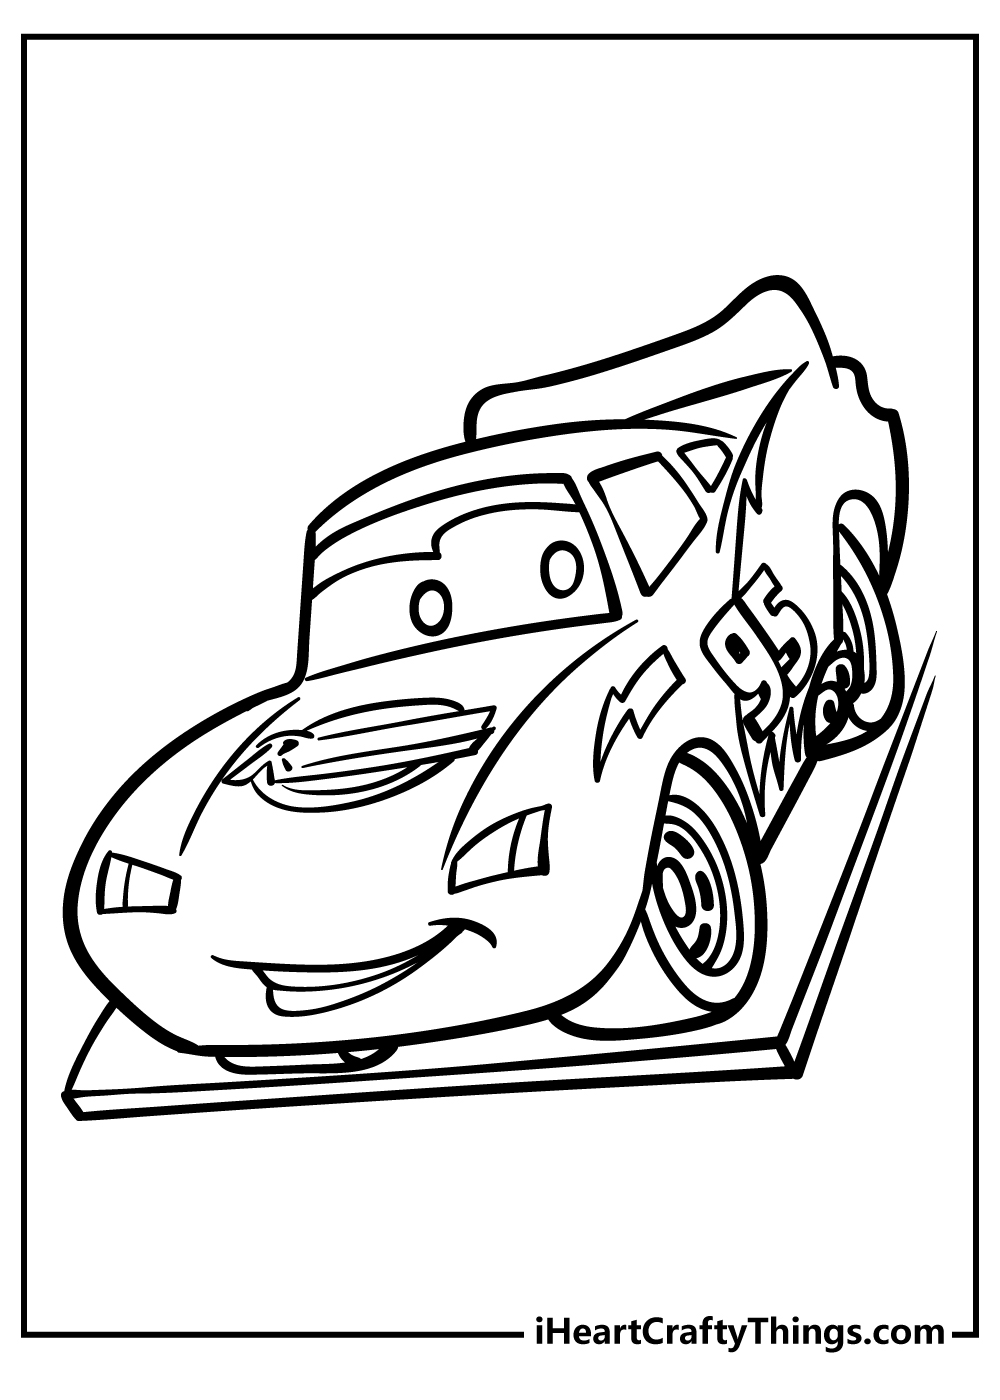 Printable Lightning McQueen Coloring Pages Updated 20 - Otakugadgets